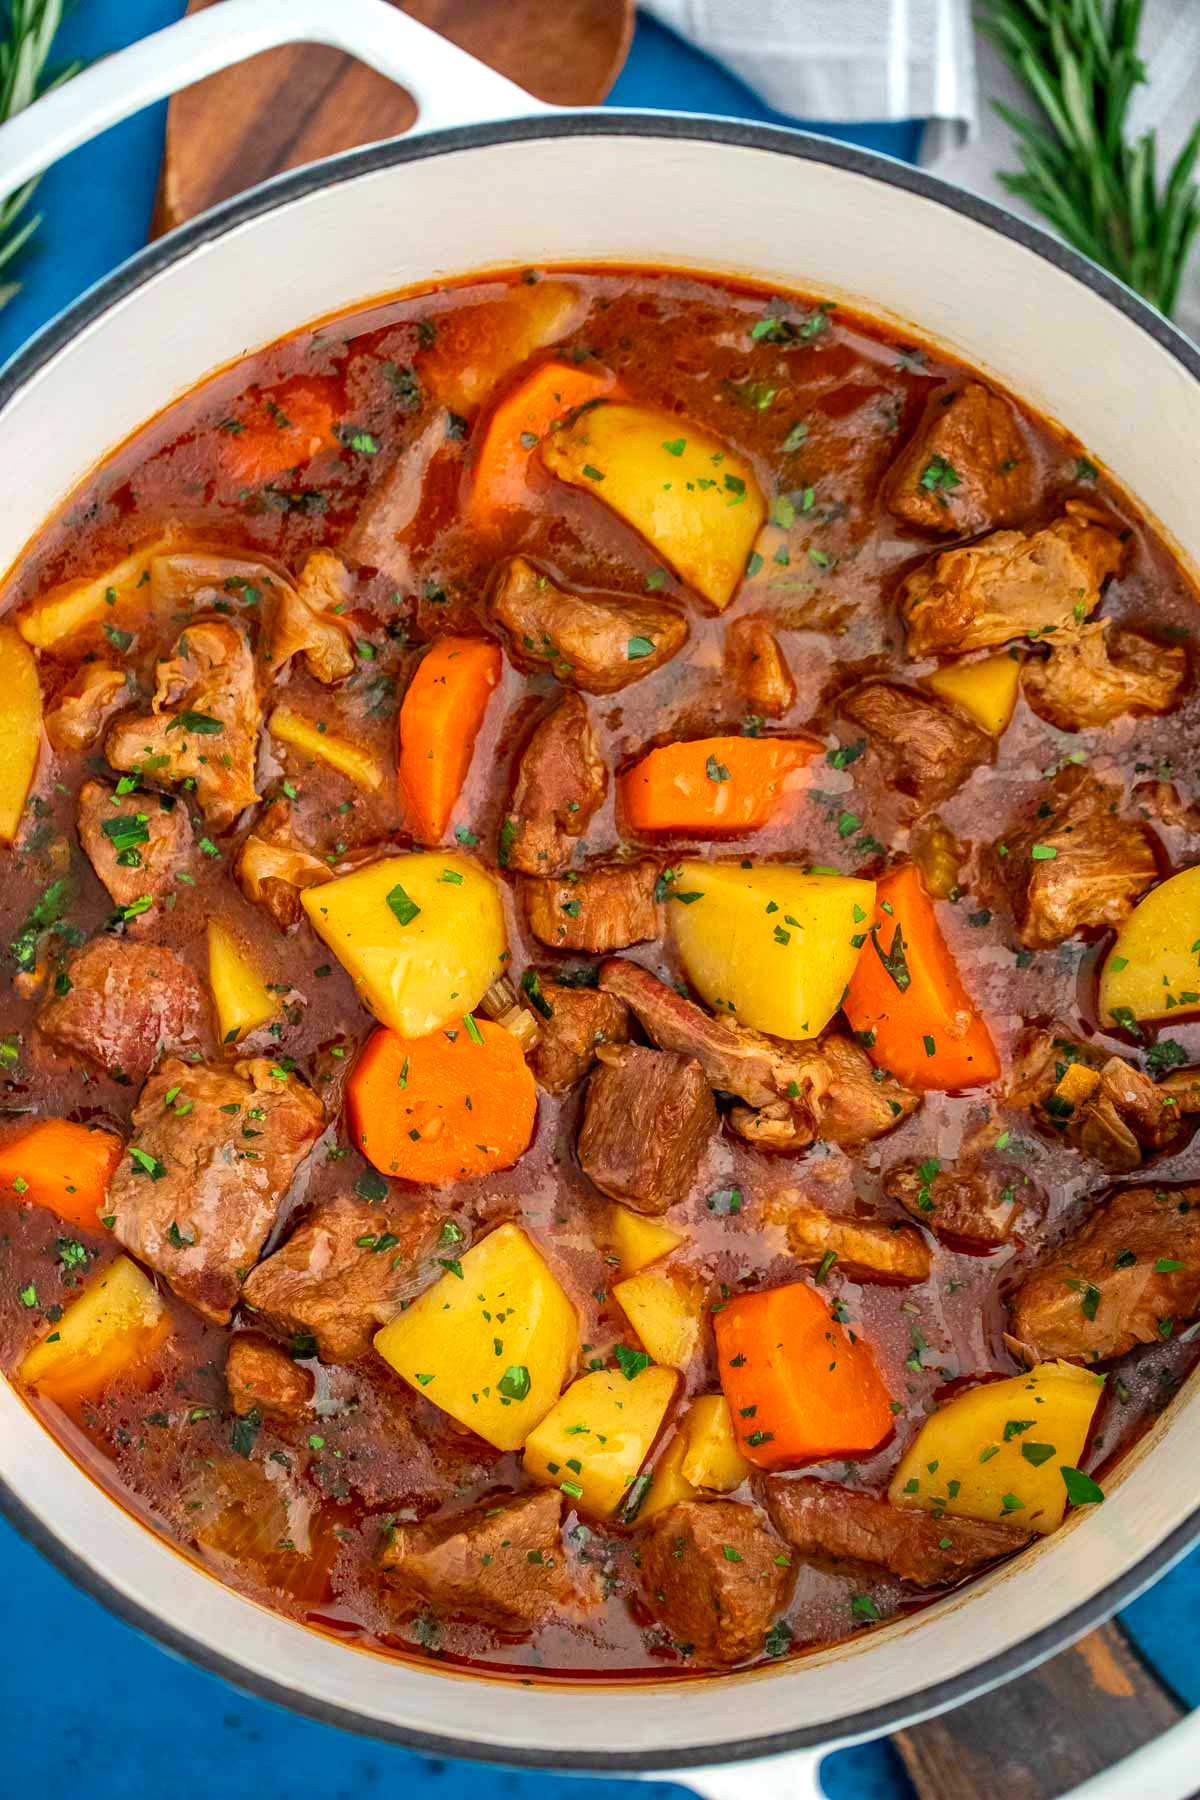 Guinness Beef Stew Recipe [VIDEO] - Sweet and Savory Meals